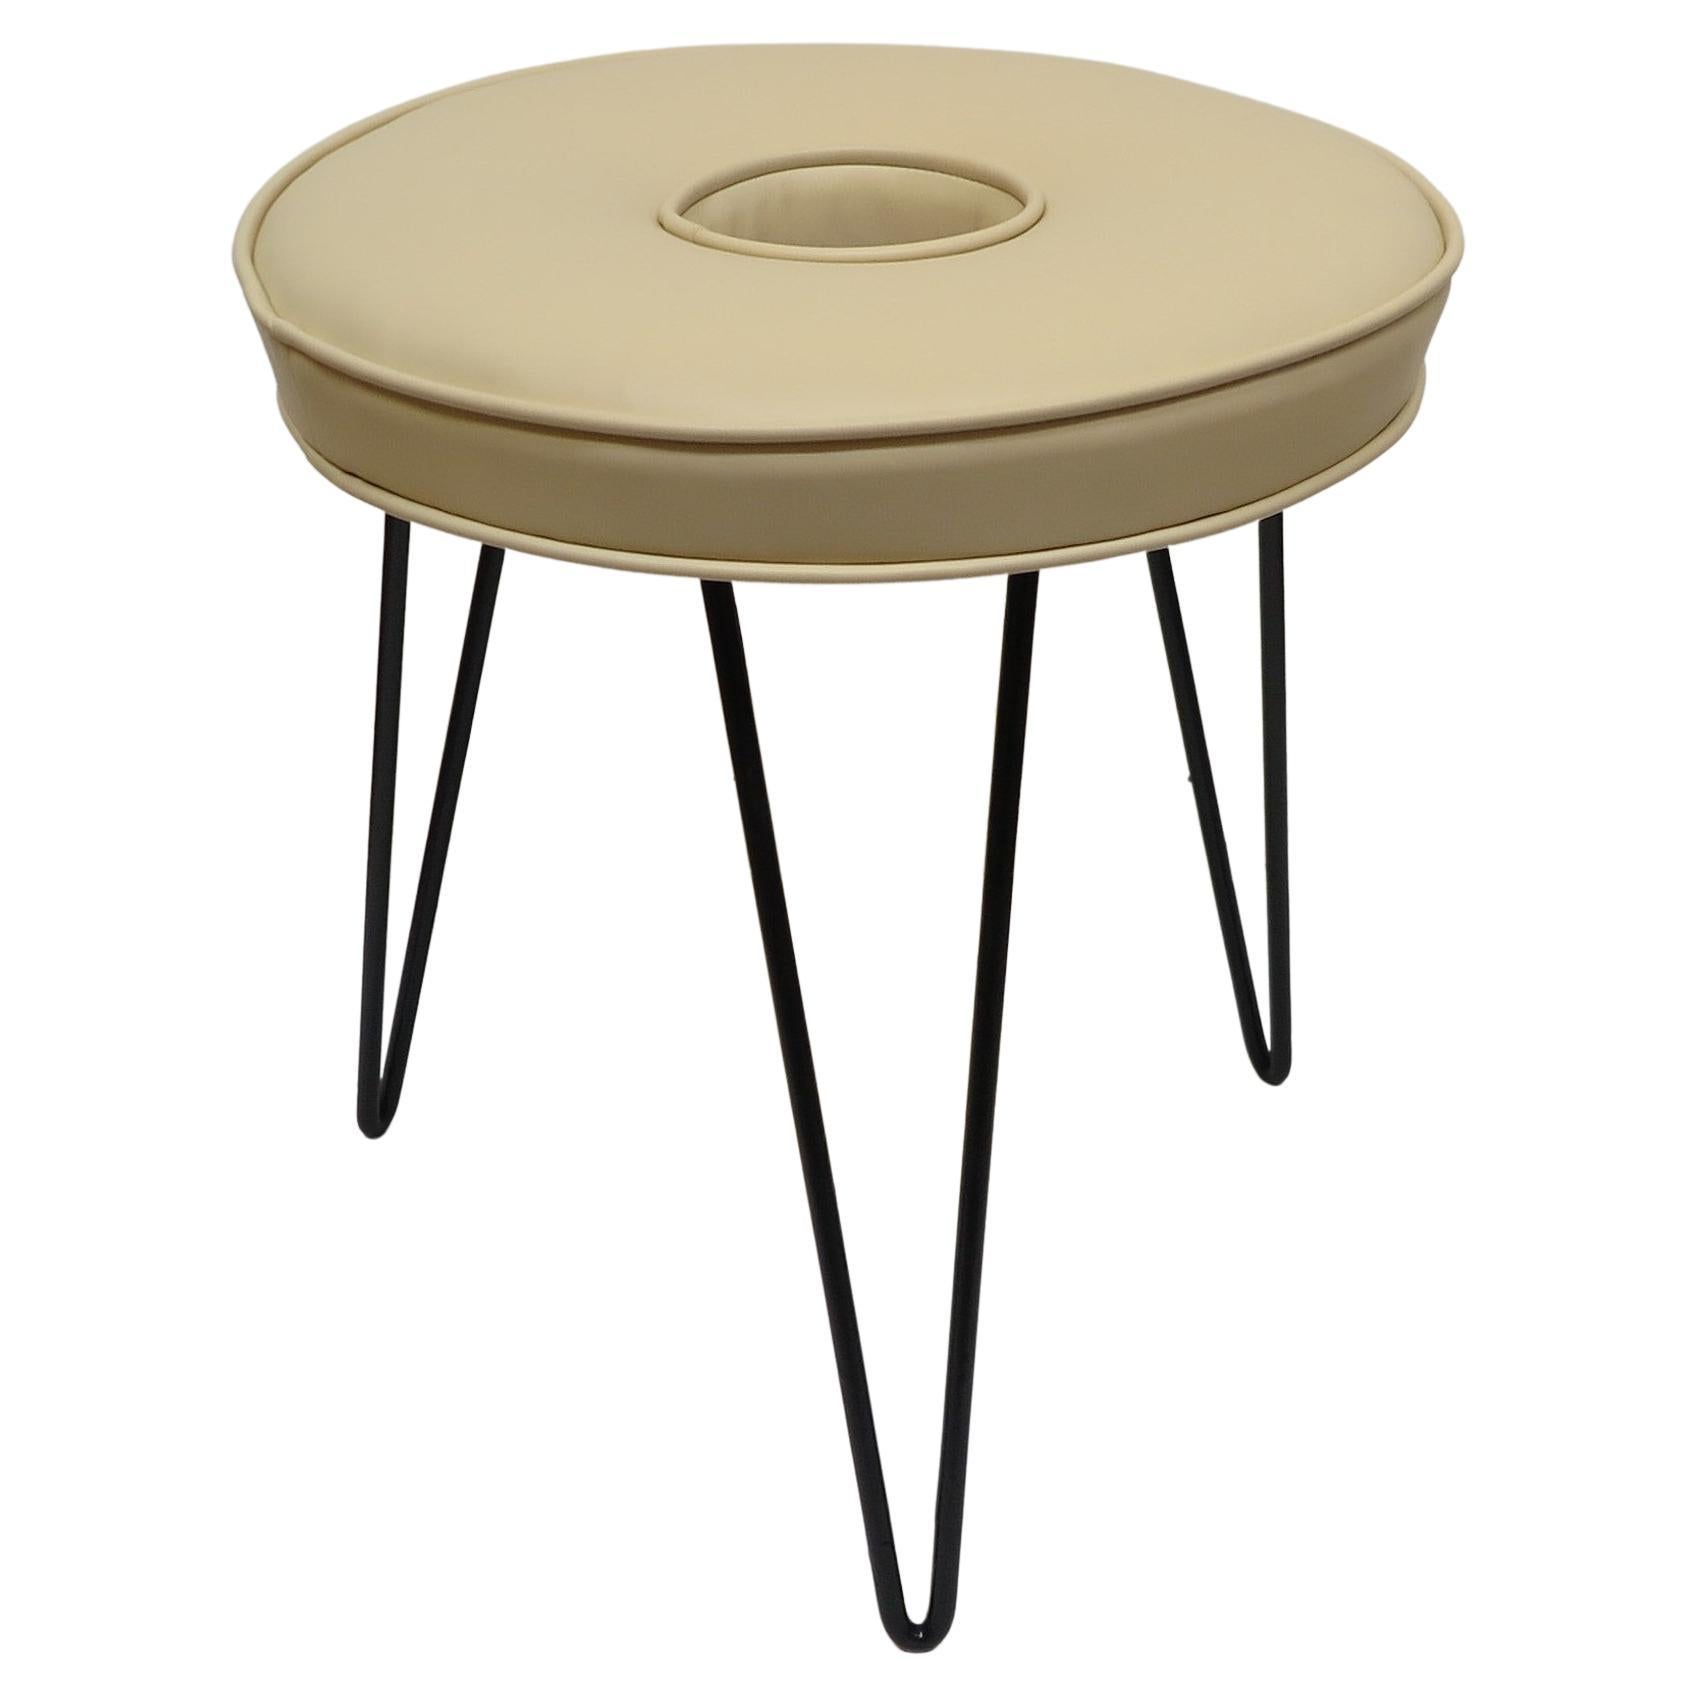 William Armbruster Donut Stool For Sale